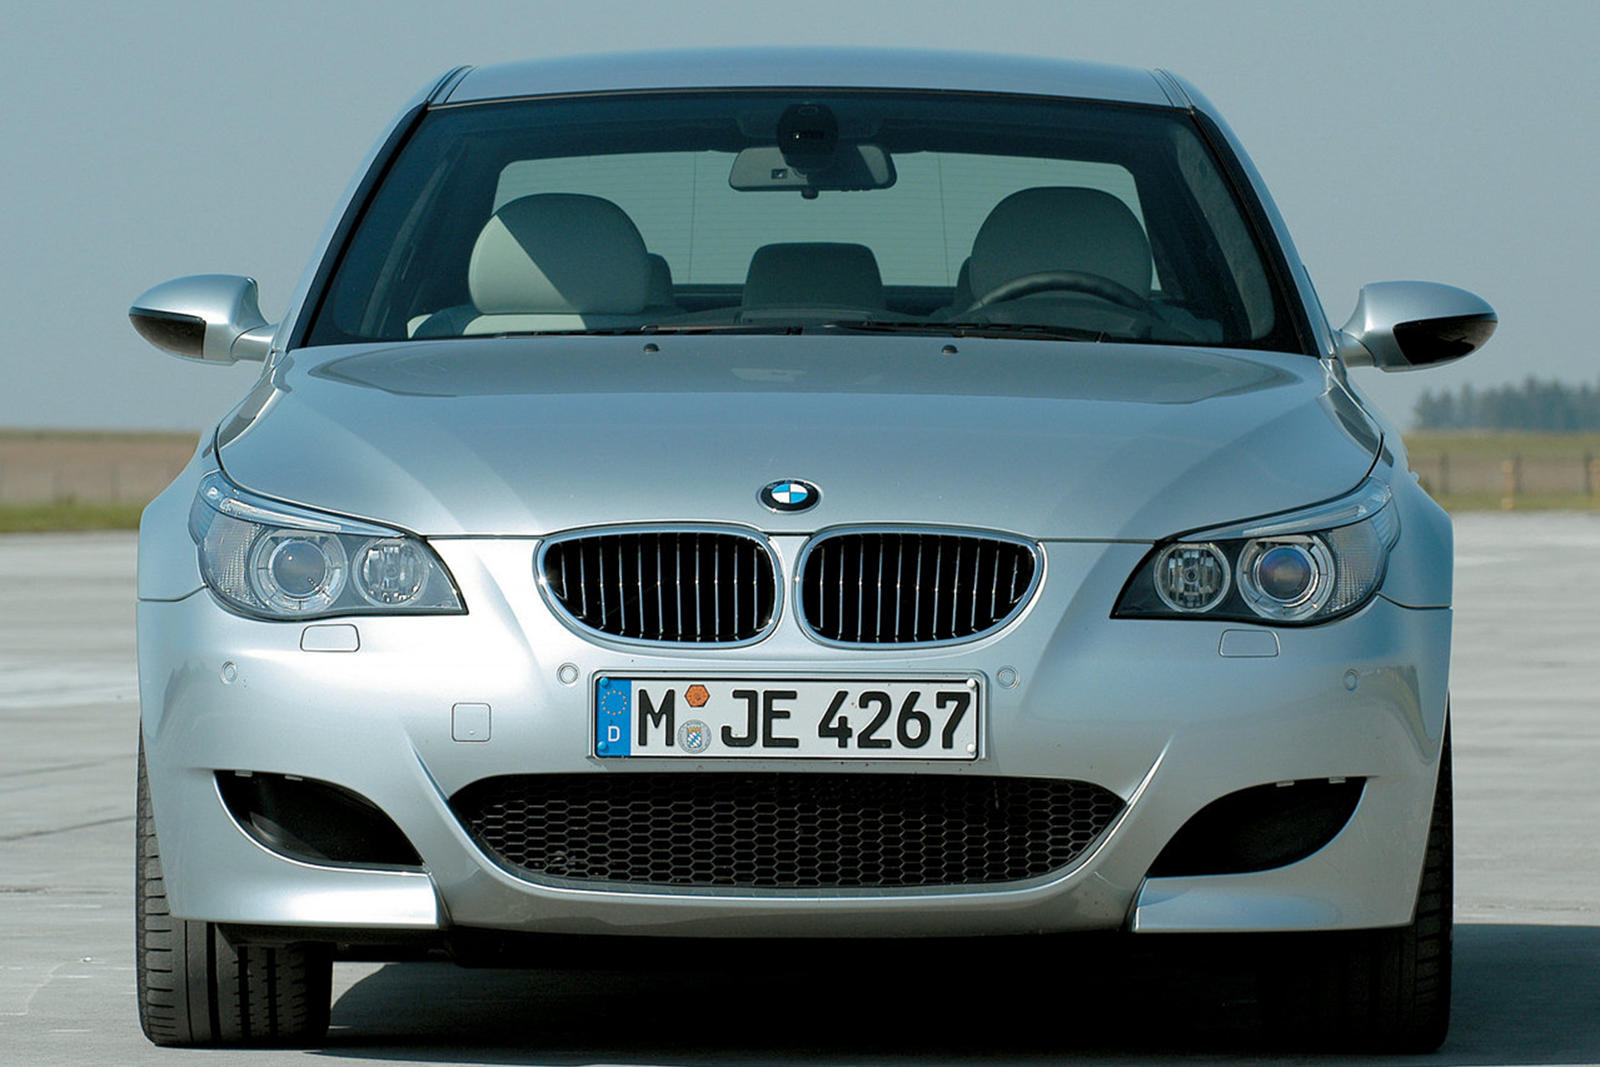 The BMW M5 of 2005